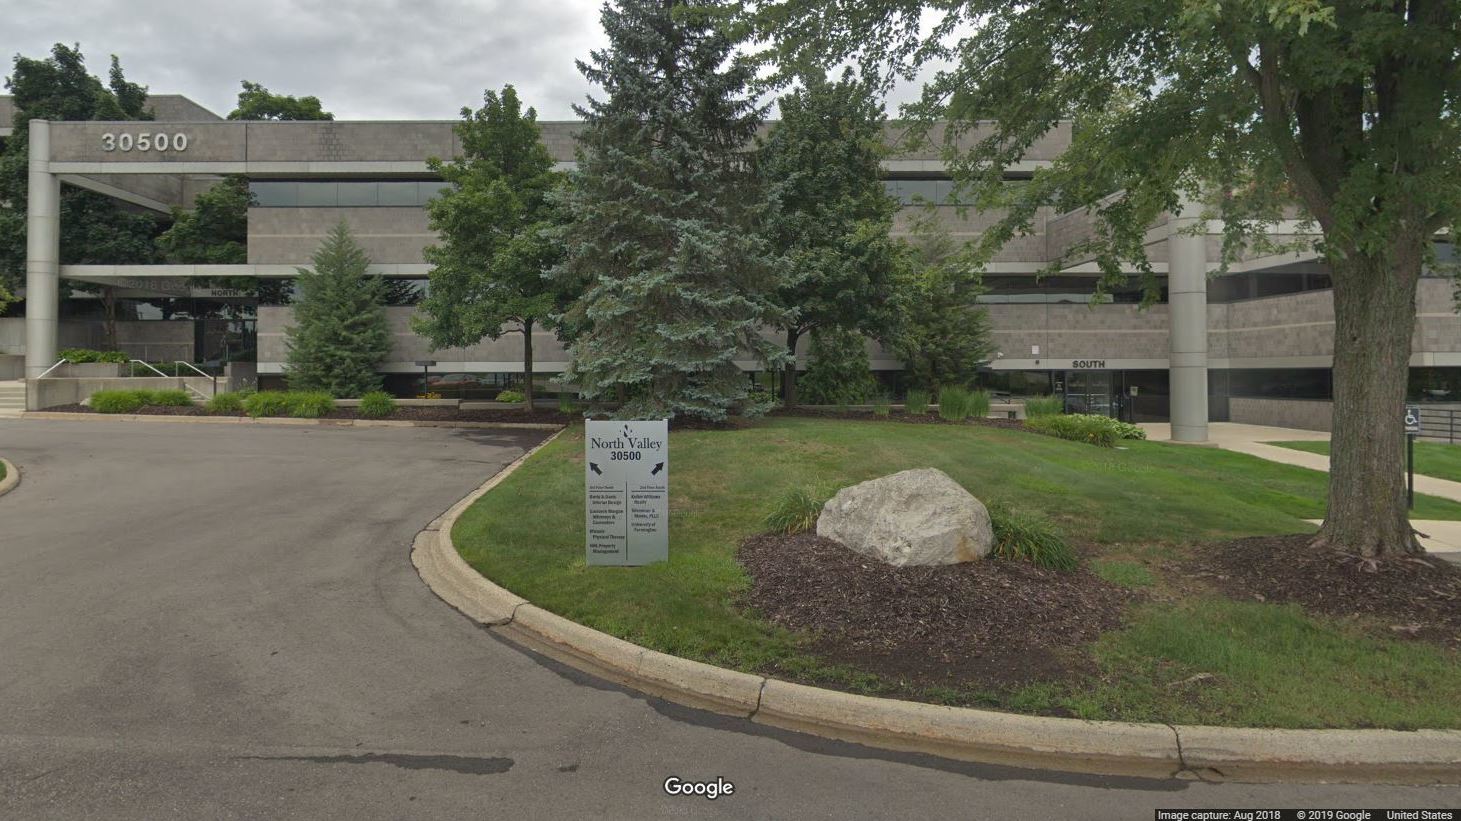 The "University of Farmington" occupied office space in this building in Farmington Hills, Mich. In court documents, eight men are accused of recruiting hundreds of "students" to the bogus school. CREDIT: GOOGLE MAPS